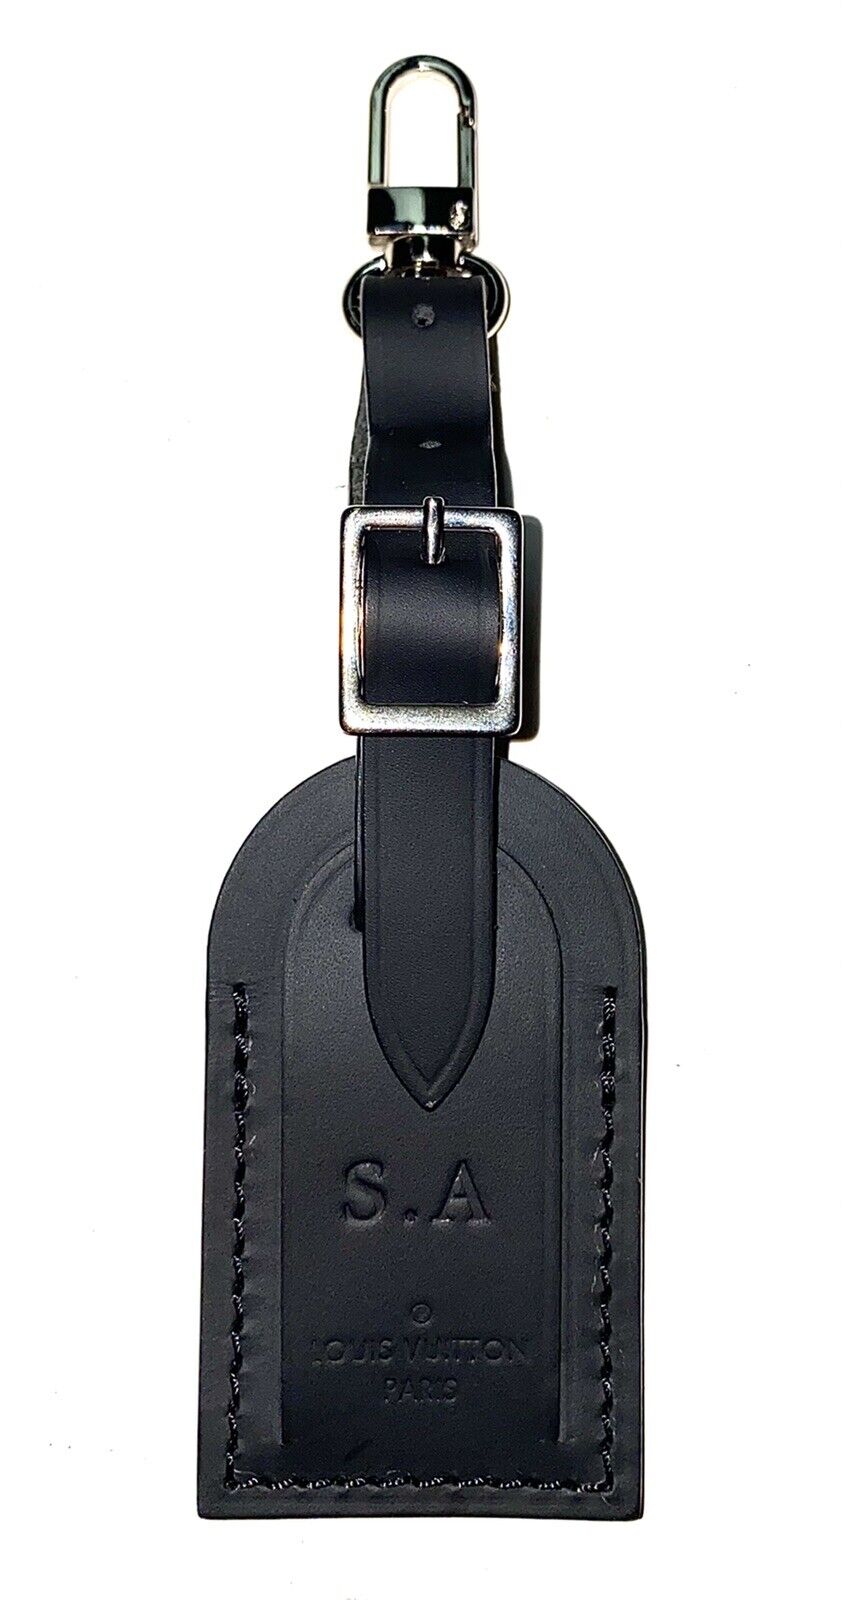 Louis Vuitton Name Tag w/ SA Initials Embossed Black Leather